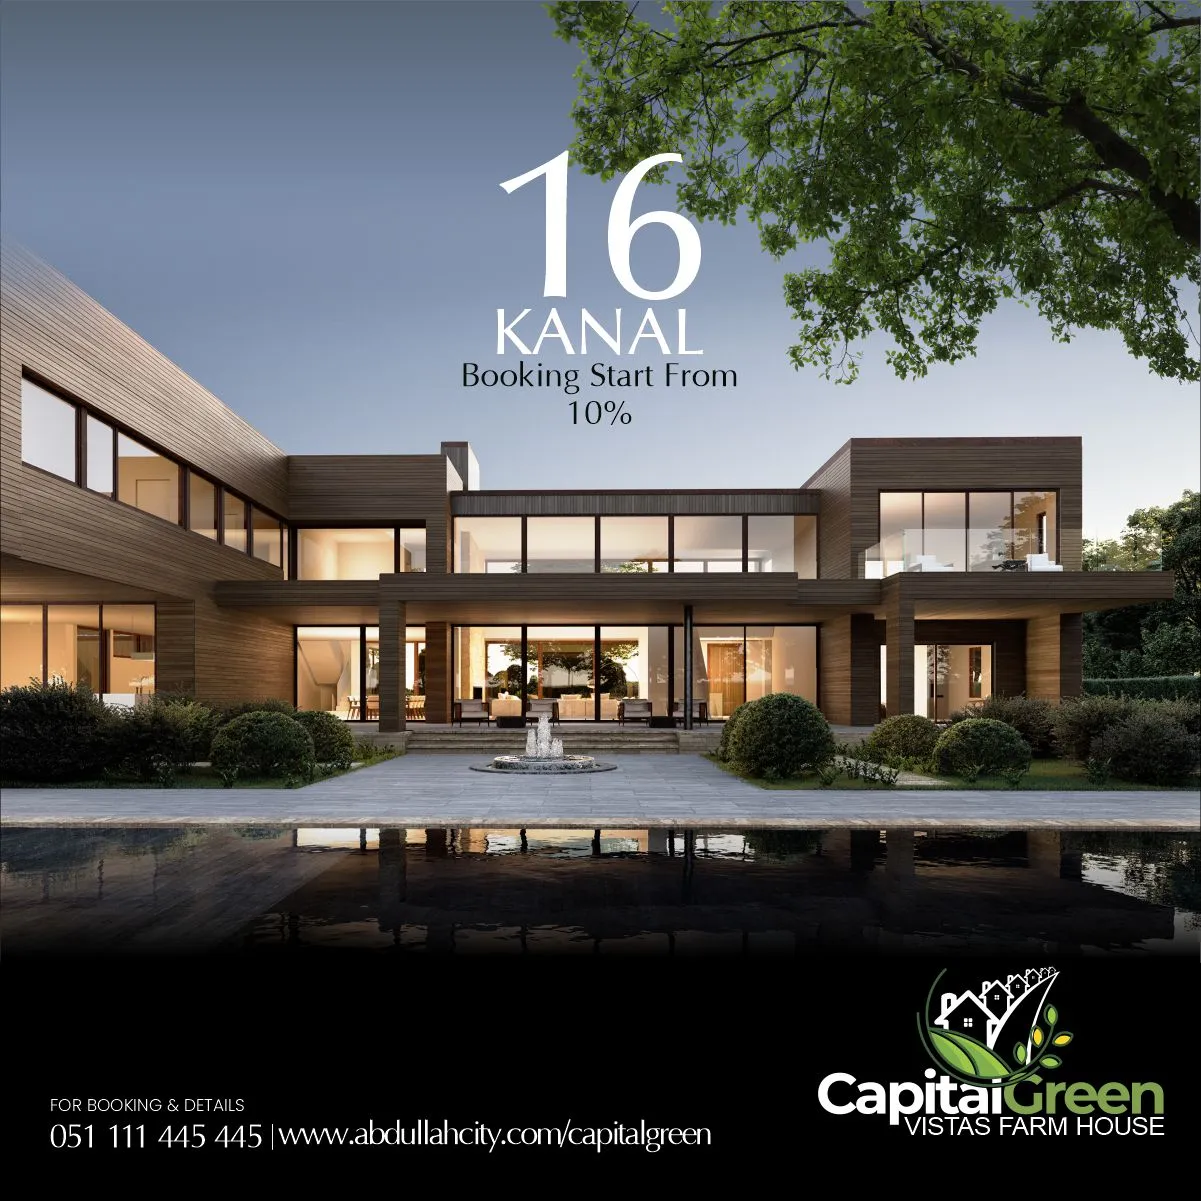 Buy Capital Green Vistas Farmhouse to enjoy the Scenic beauty and Wide Landscapes of the Iconic Margalla Hills between twin cities of Rawalpindi and Islamabad